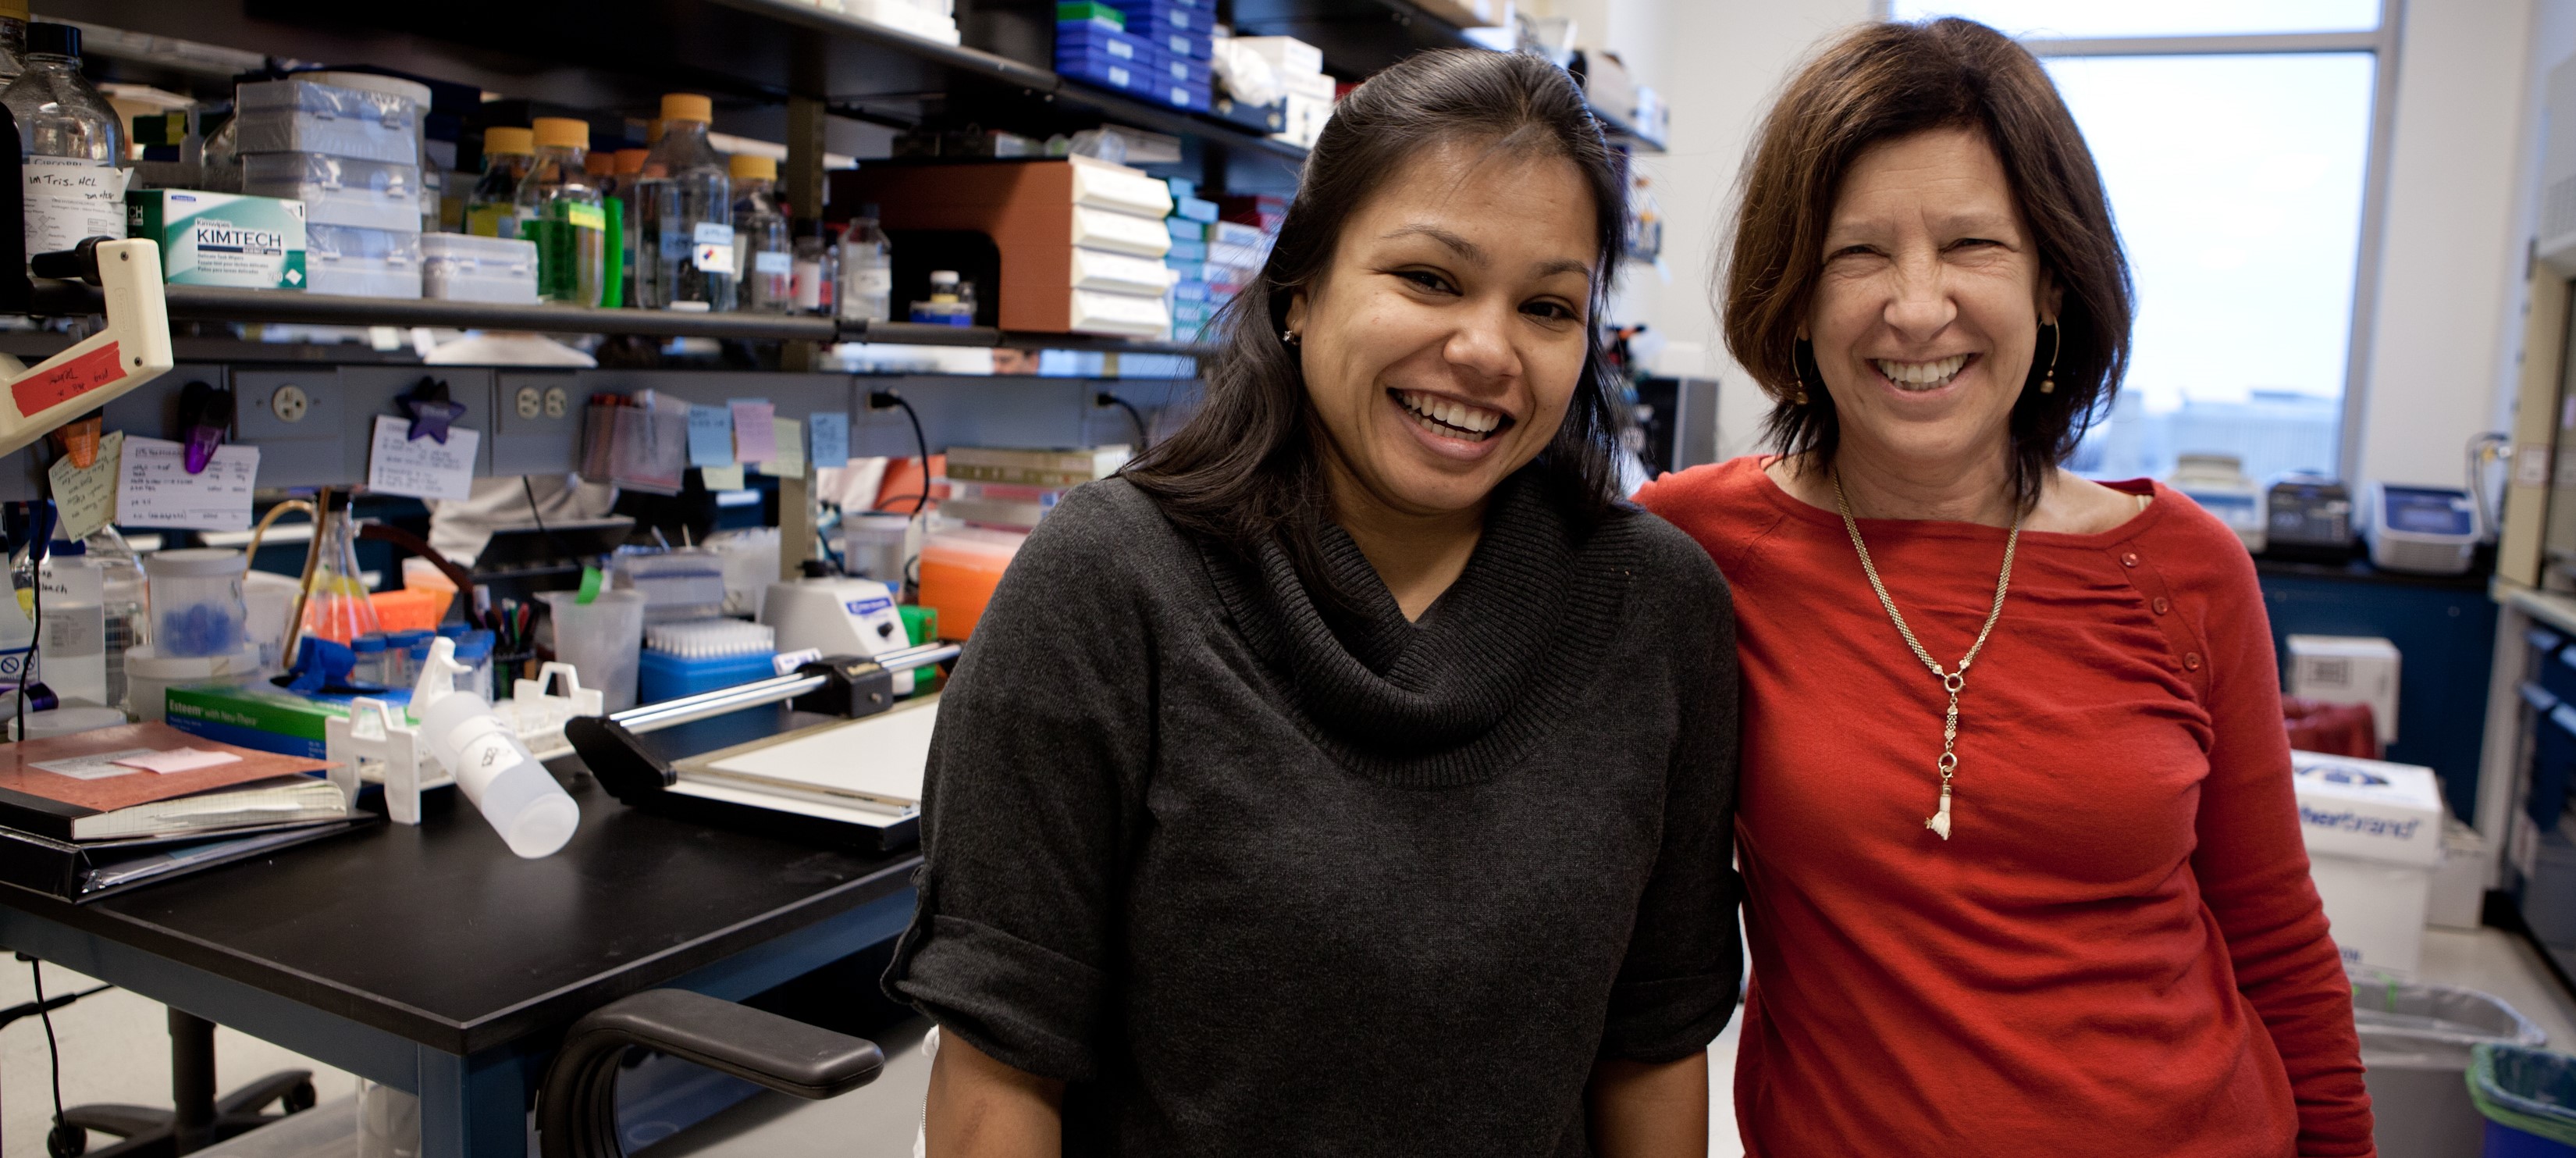 Dr. Nancy Ratner in red stands with a post-doctoral fellow in lab